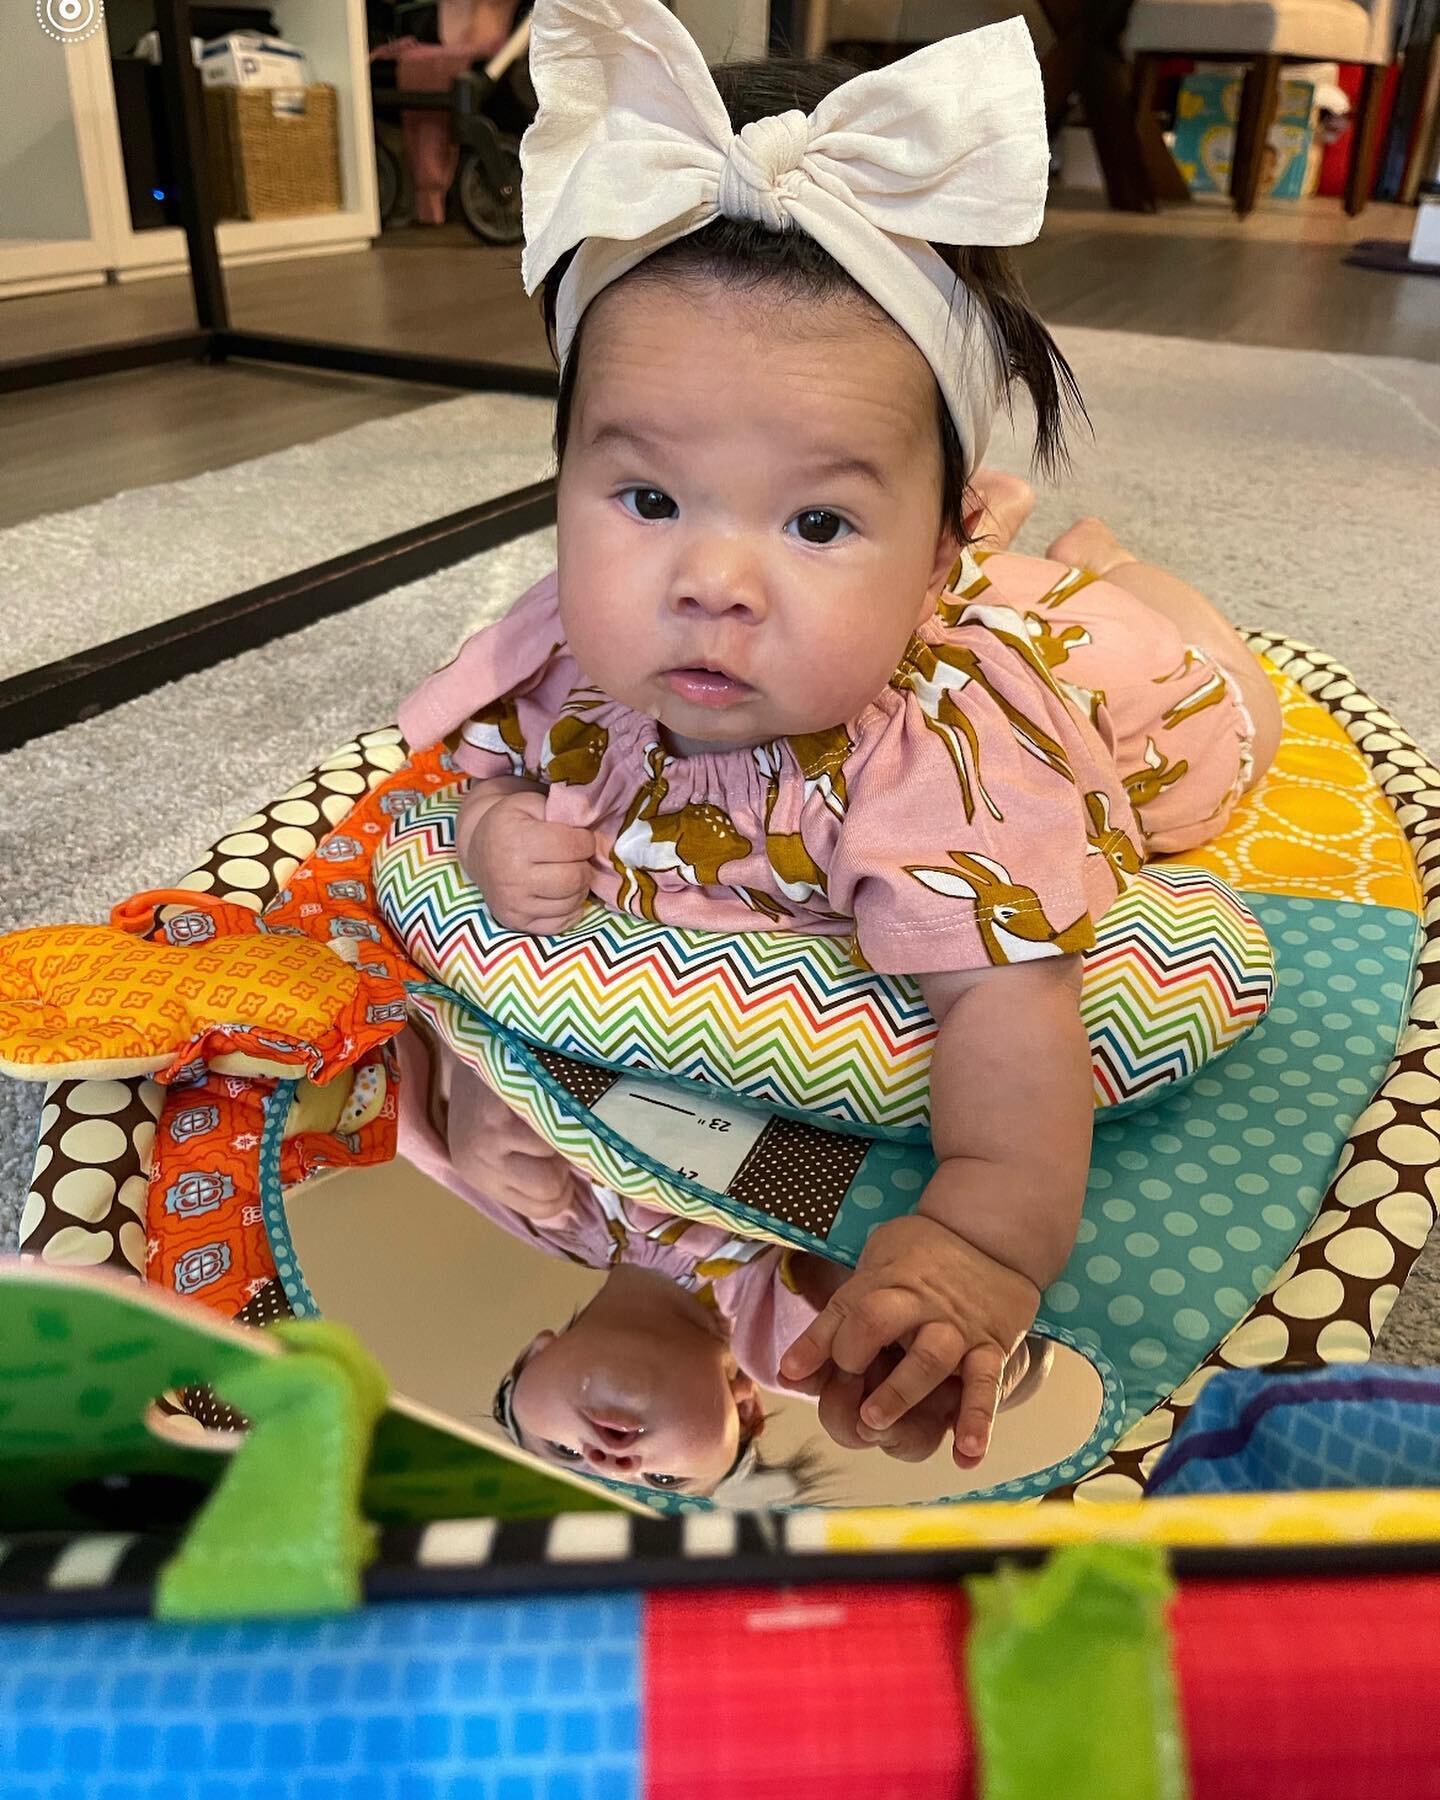 We love tummy time! 

The main goals during therapeutic tummy time sessions (0-6 months)are: 
☑️full range of head turning side to side
☑️good oral/mouth resting posture
☑️head and neck extension 
☑️ rolling into and out of tummy time
☑️ social engag